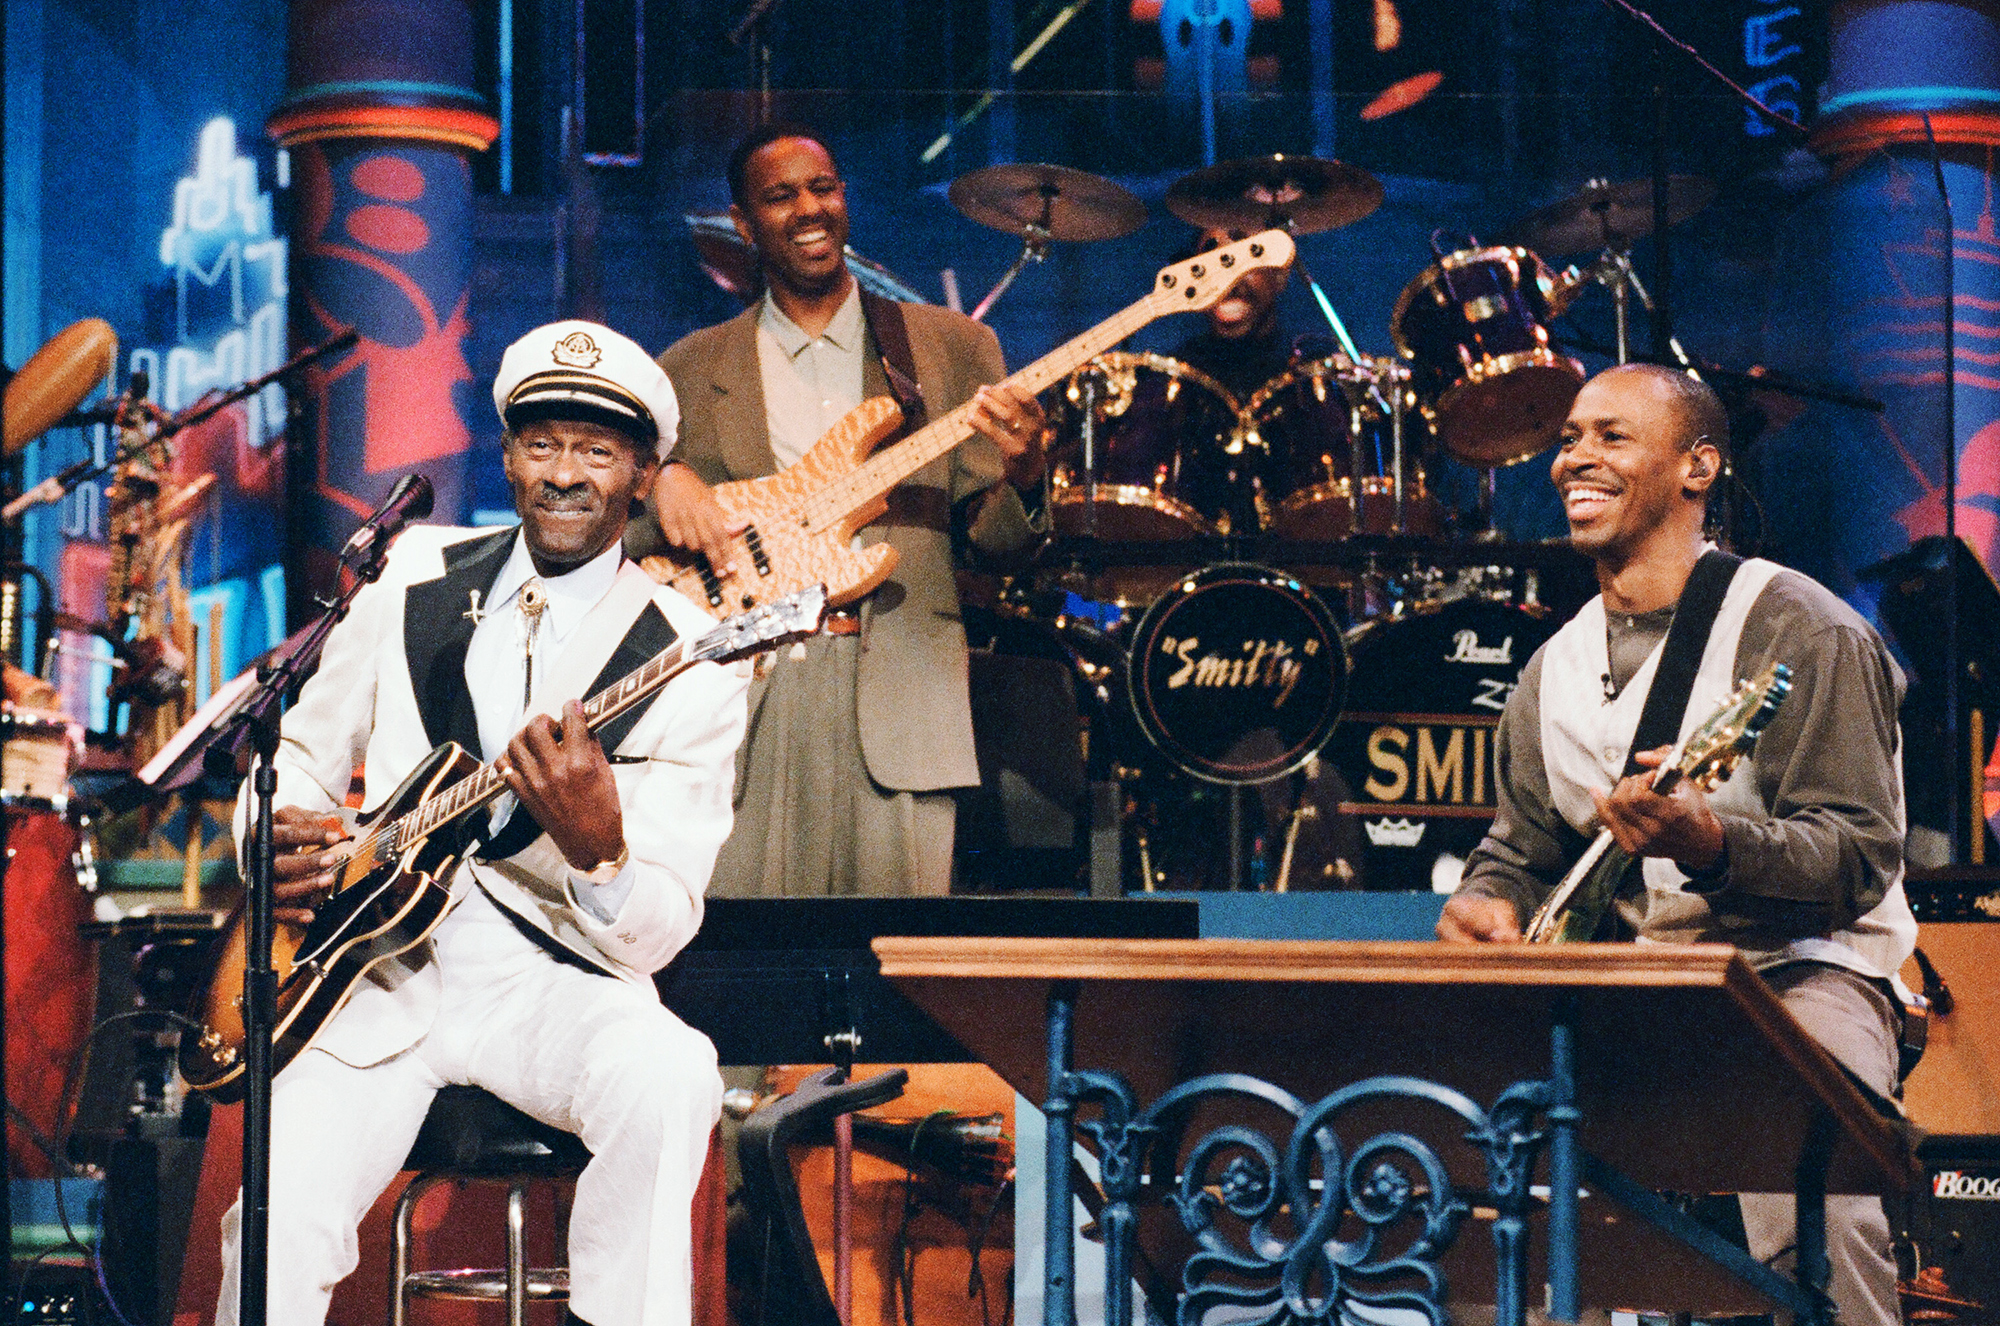 Chuck Berry performs with The Tonight Show Band in Burbank, Calif., on Oct. 4, 1995.